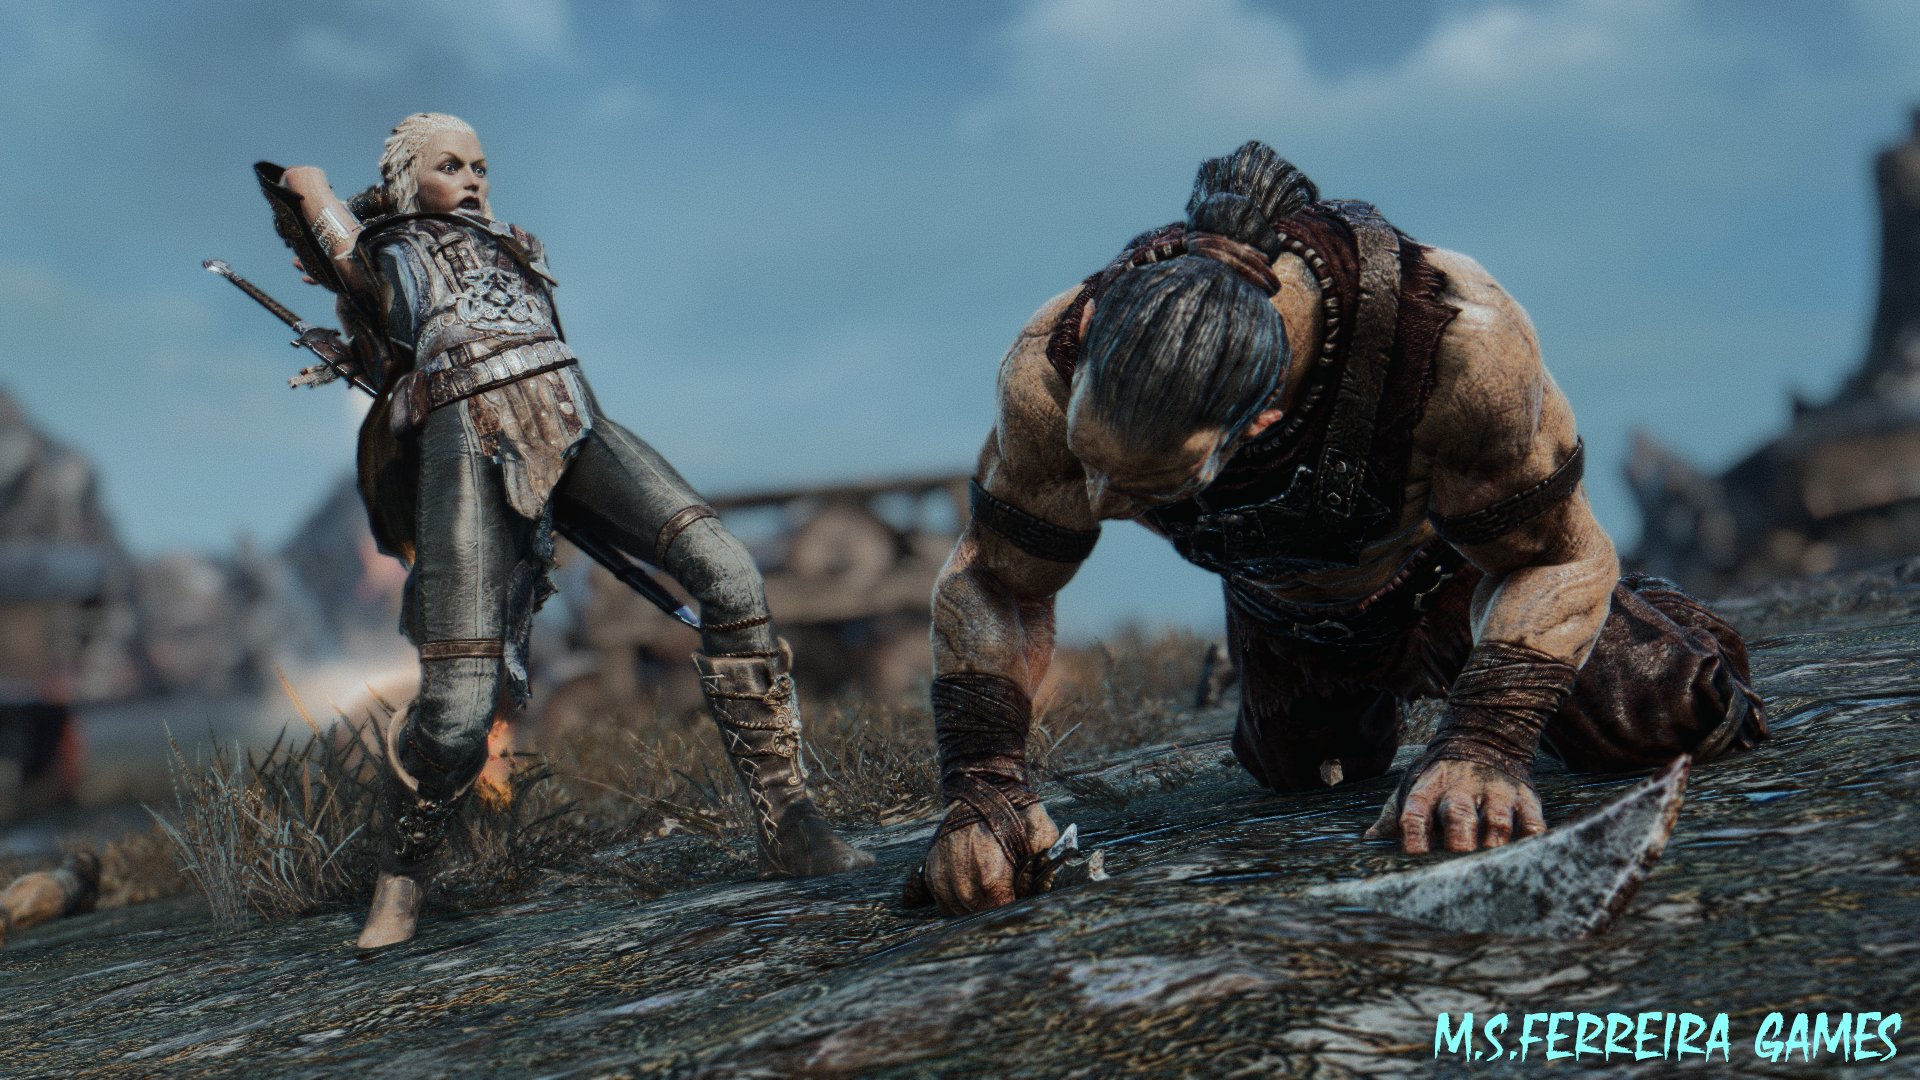 M.S.Ferreira Games on X: It's the end?: Middle-Earth: Shadow of Mordor  with ReShade of the game The Witcher 3 Modified.   / X